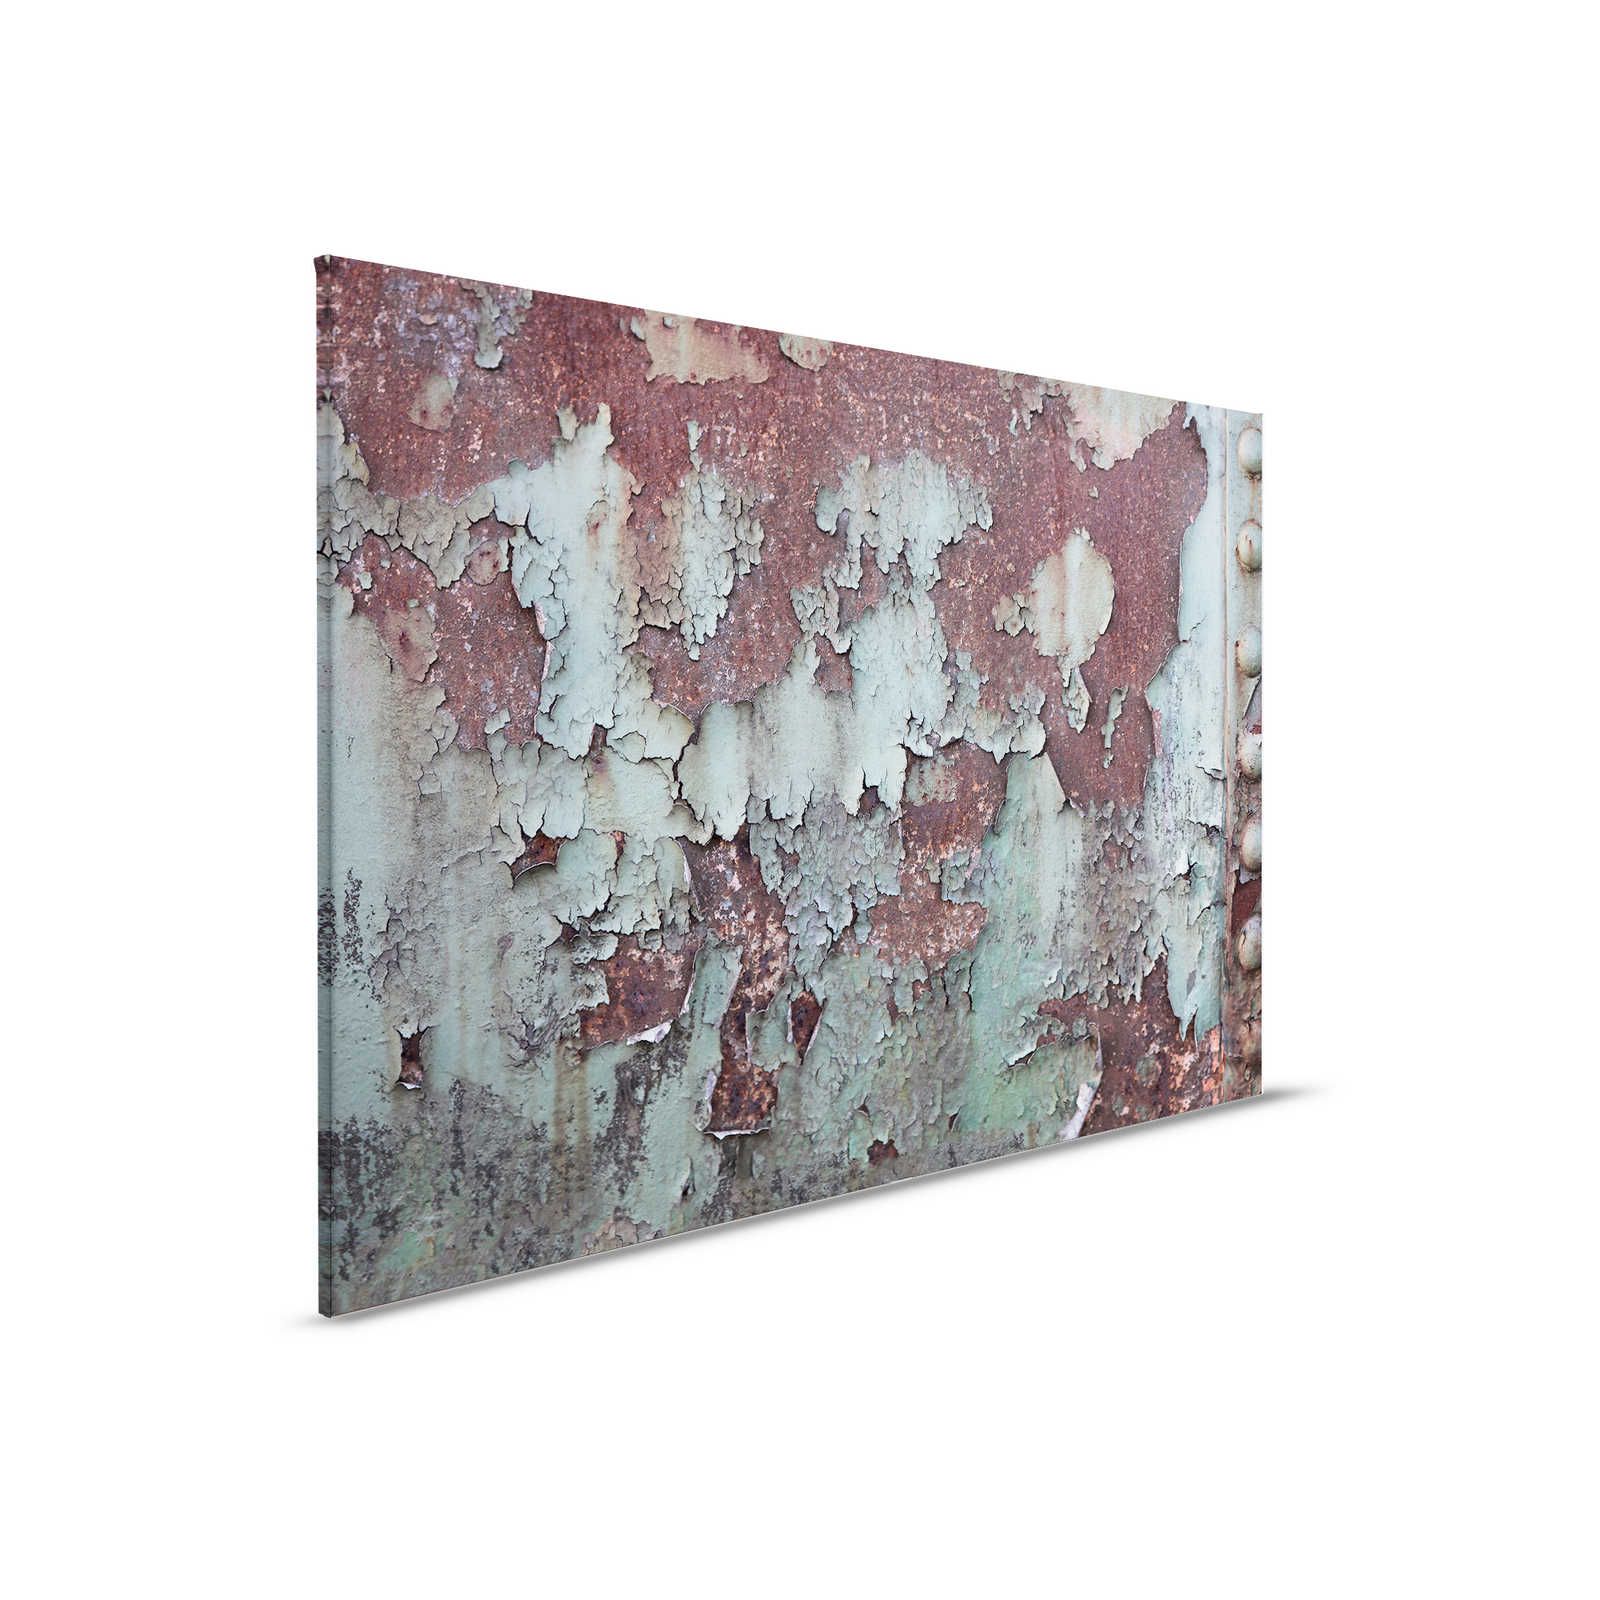         Canvas painting corroding ship's wall - metal plate with rust - 0,90 m x 0,60 m
    